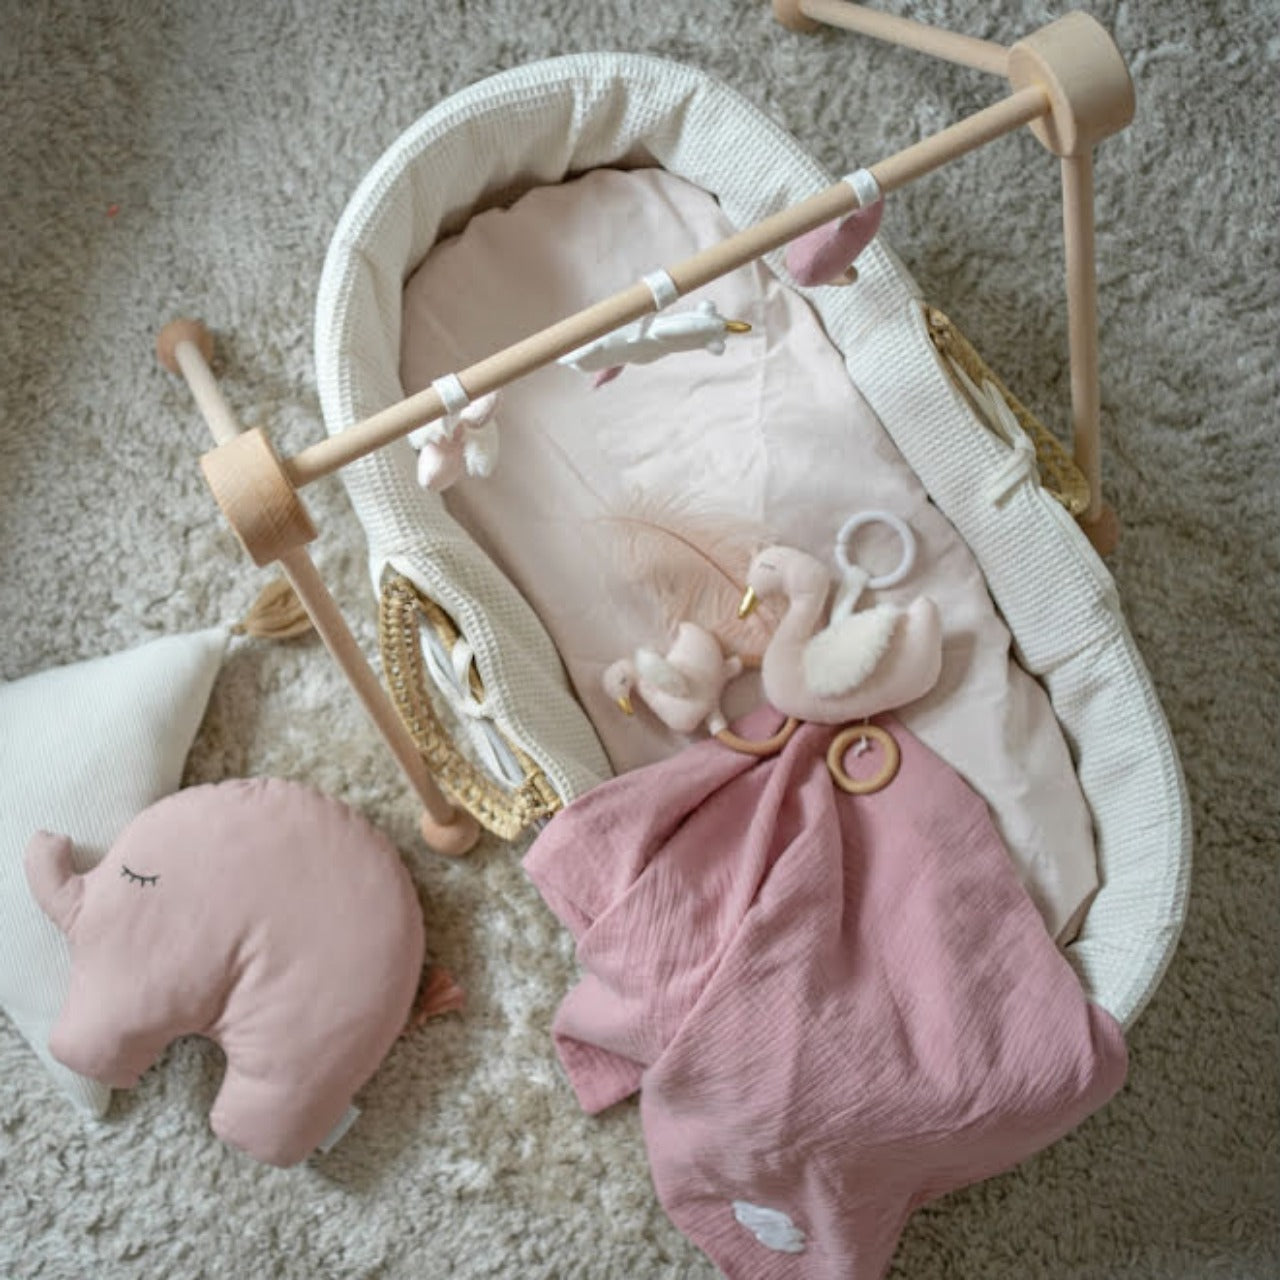 Wooden baby gym (white or natural)